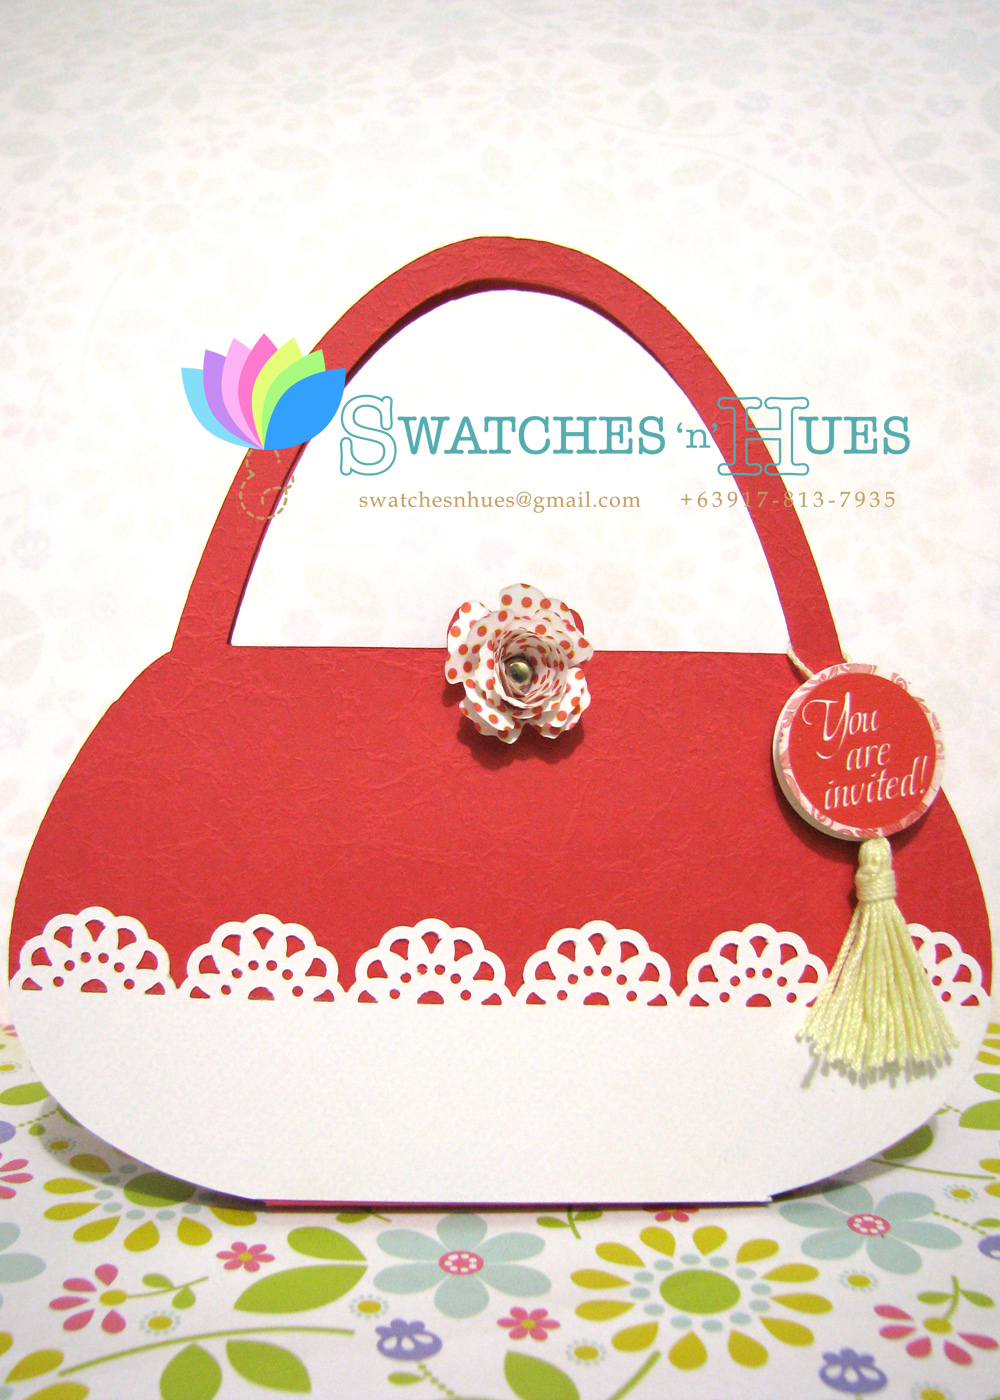 Swatches & Hues : Handmade with TLC: Princess themed purse invitation ...